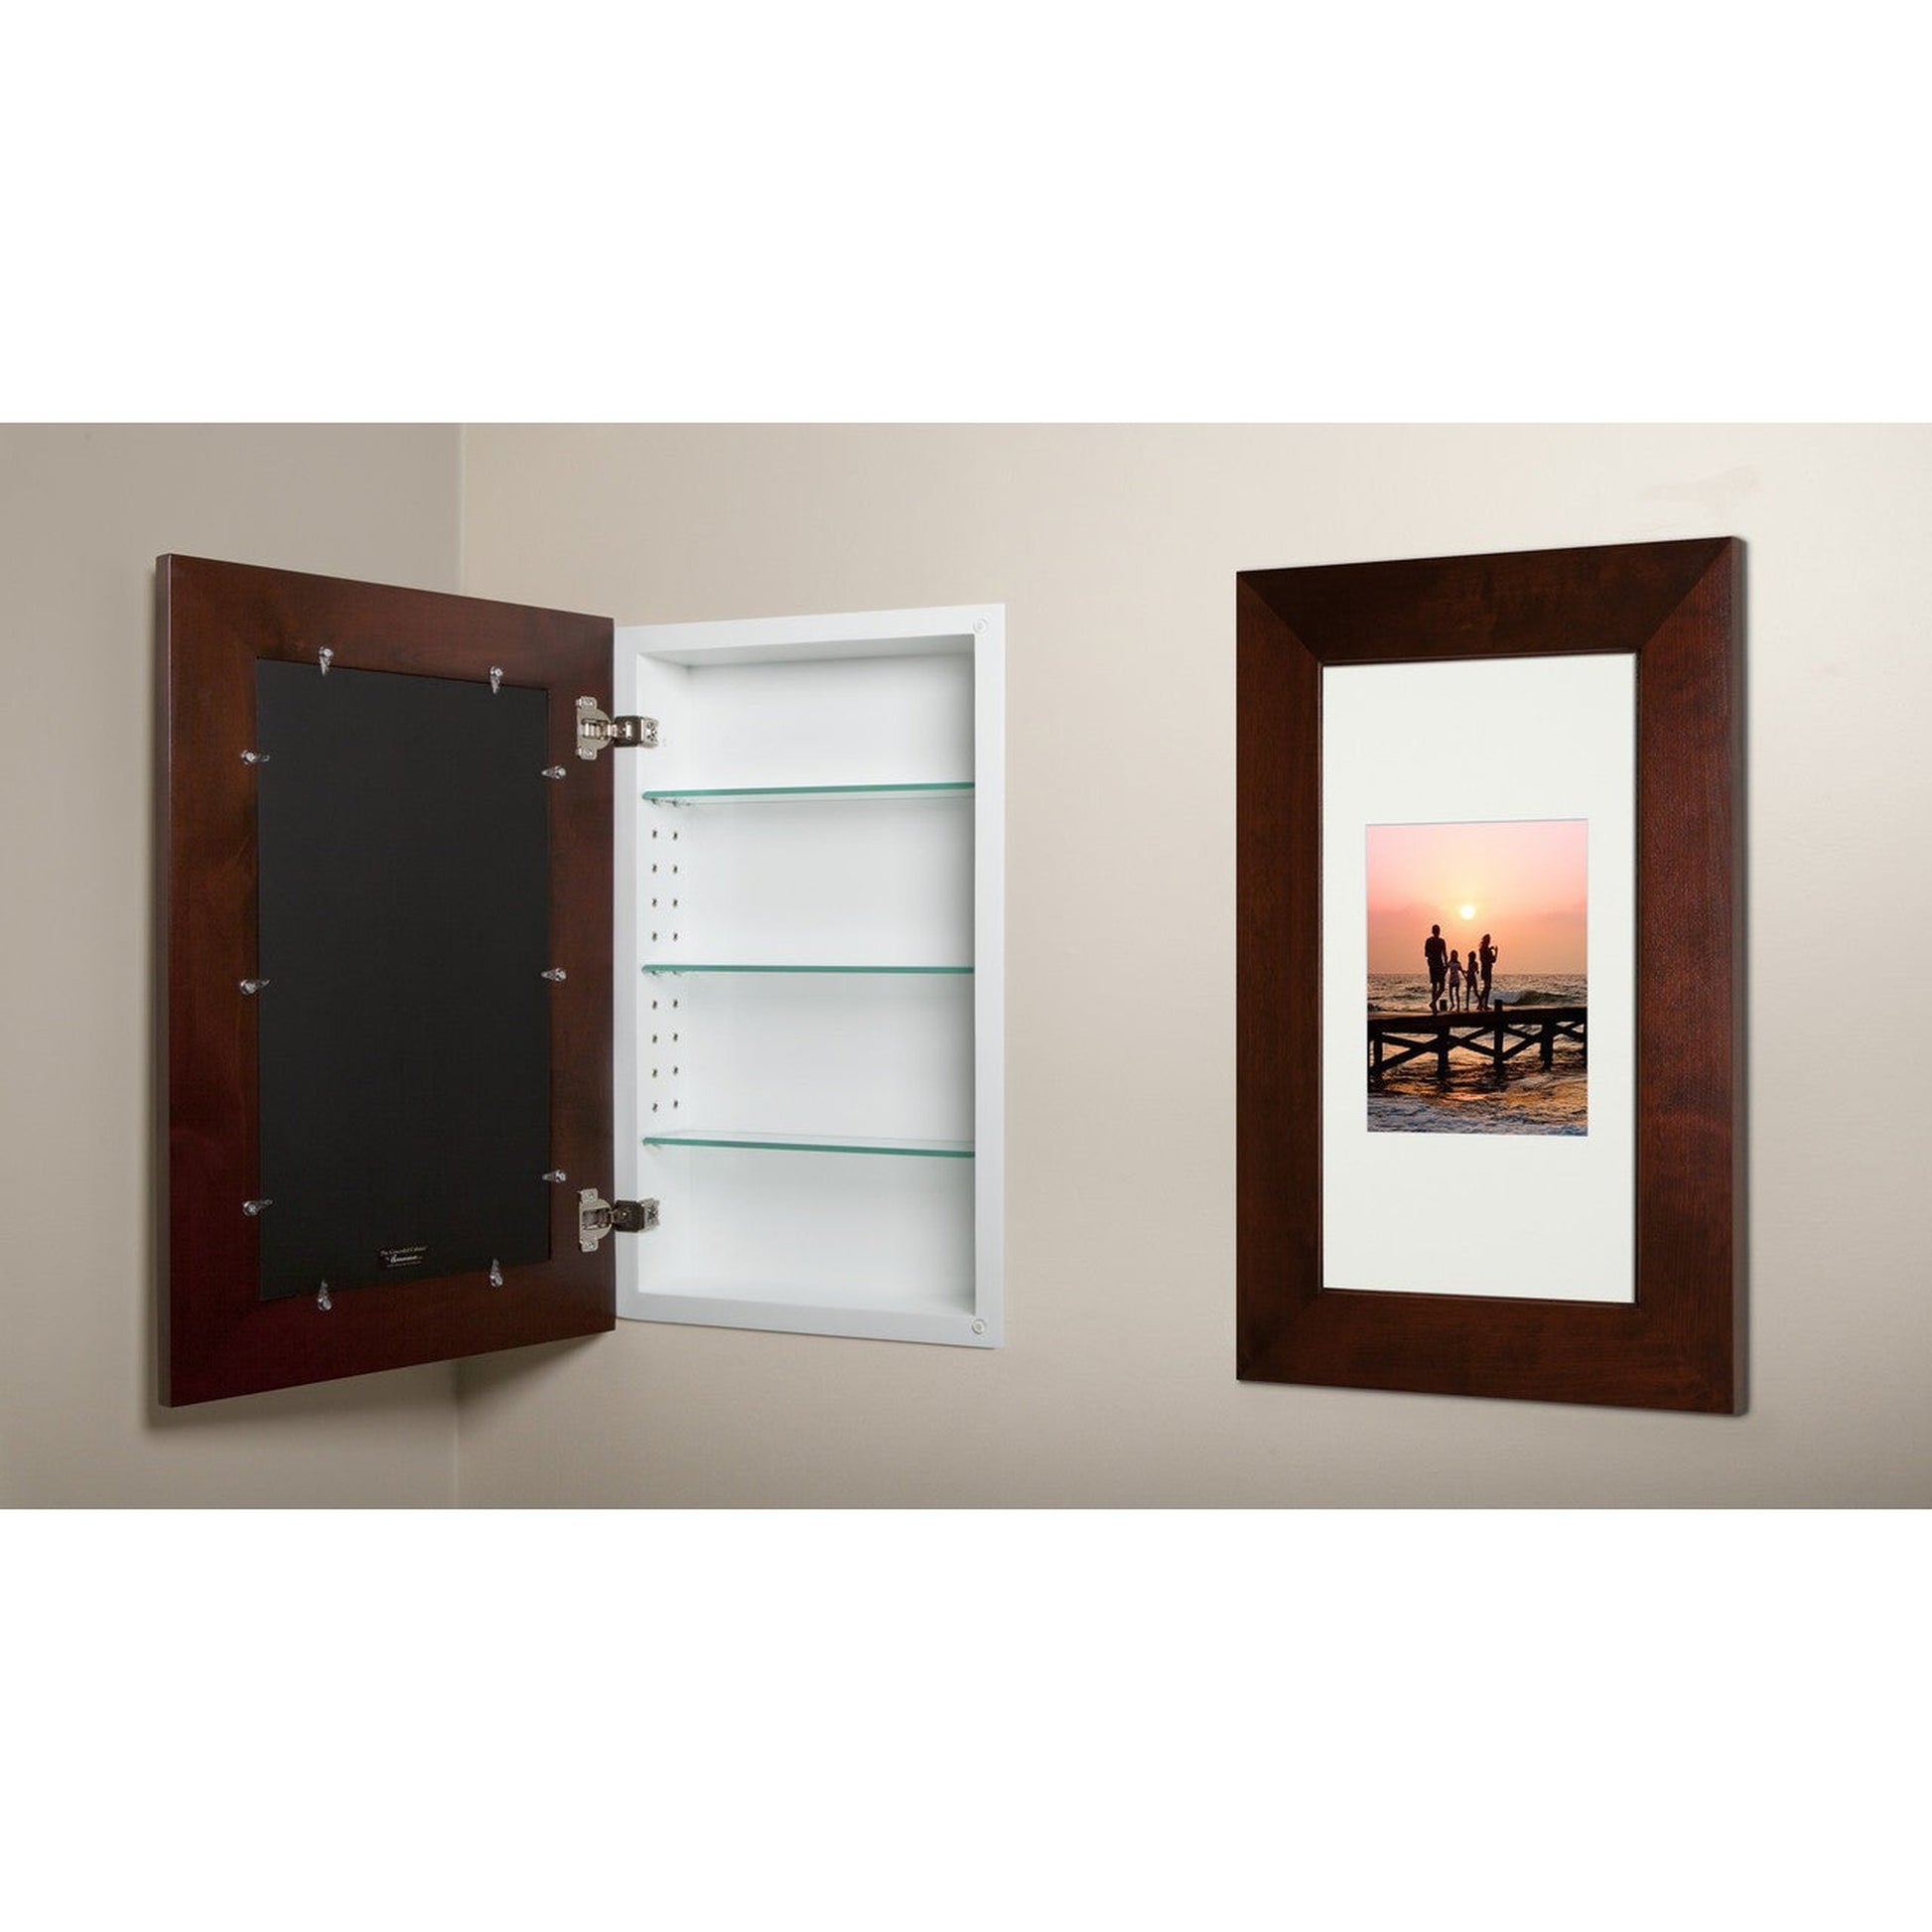 Fox Hollow Furnishings 14" x 24" Espresso Extra Large Standard 3.75" Depth Natural Interior Recessed Picture Frame Medicine Cabinet